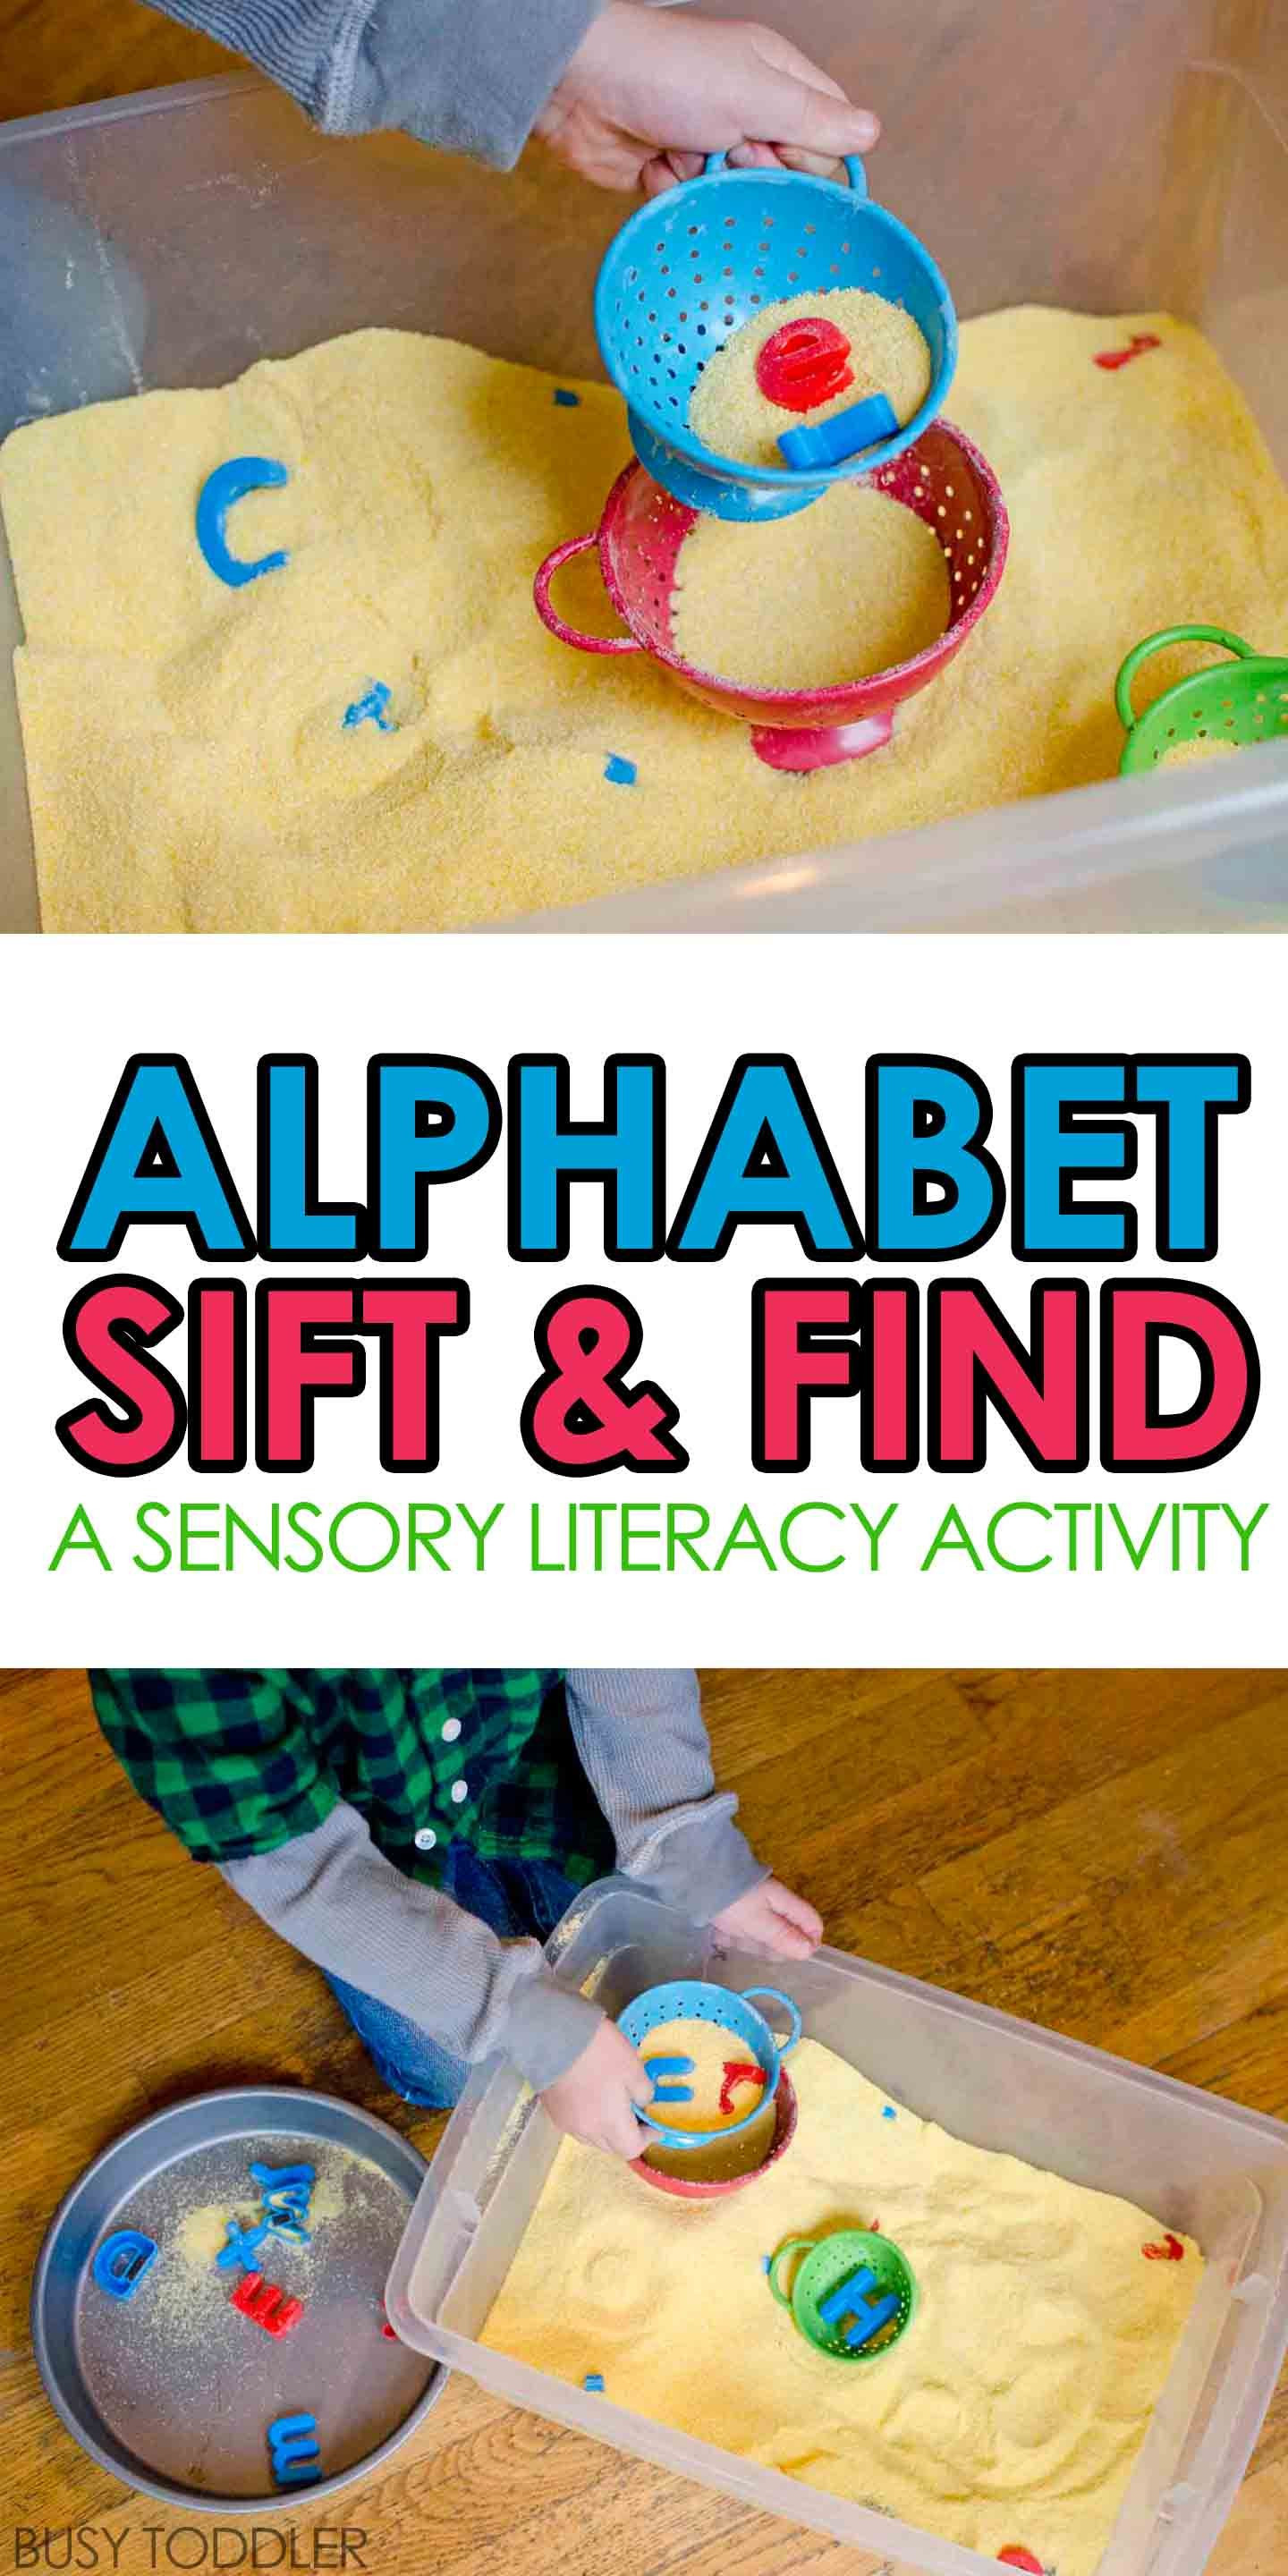 Learning Crafts For Toddlers
 Alphabet Sift and Find BUSY TODDLER